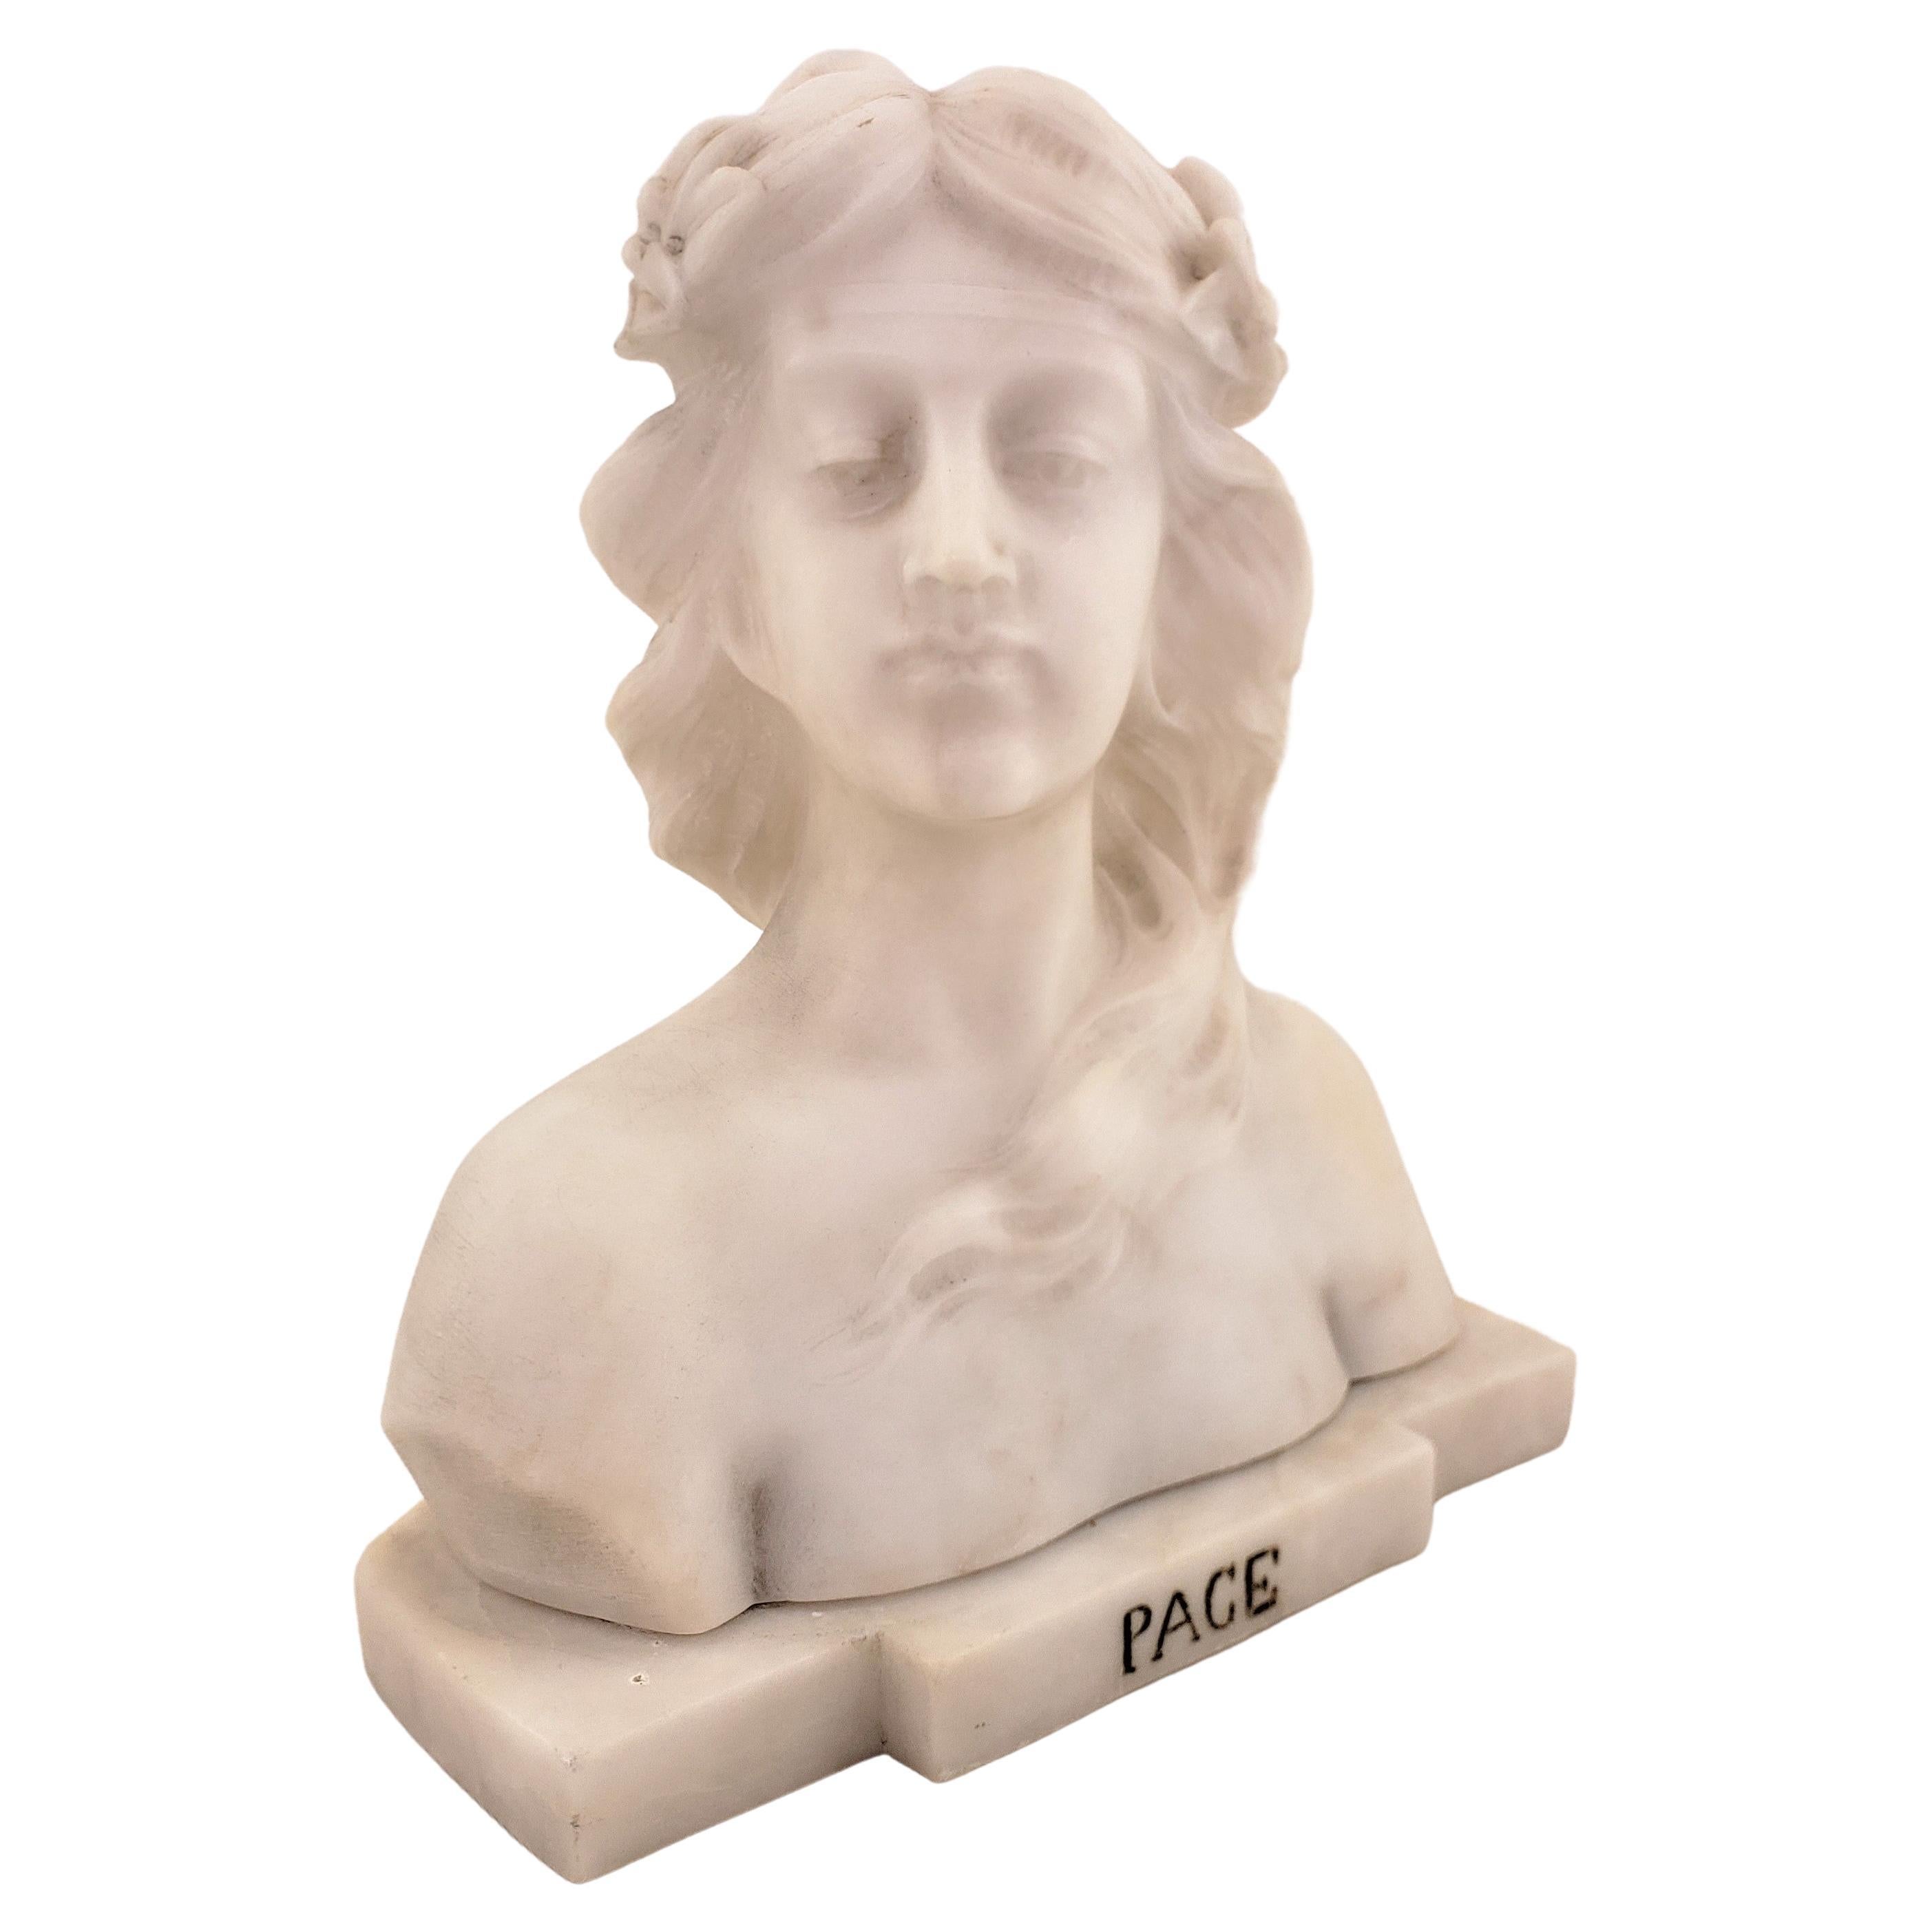 E. Zocchi Signed Antique White Marble Bust or Sculpture of a Young Female "Pace" For Sale